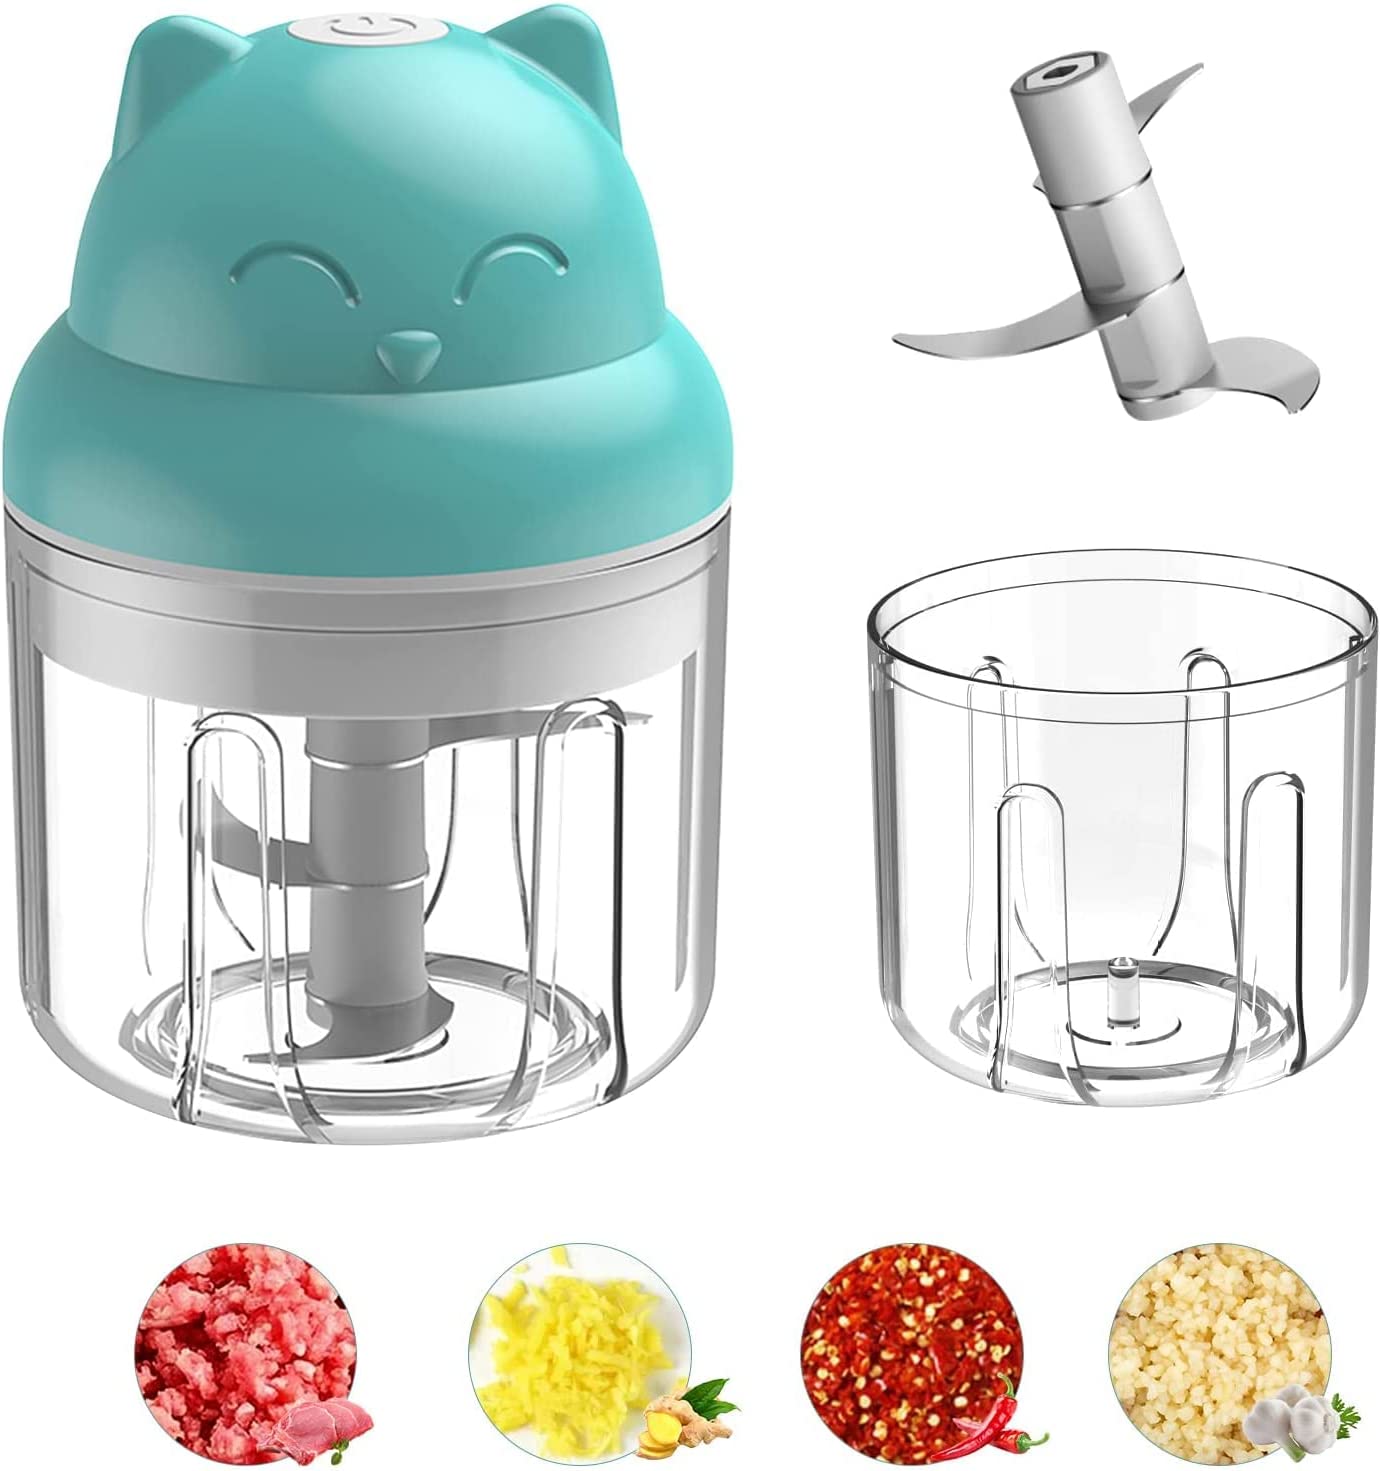 EUBSWA Mini Electric Chopper, 250 ml Onion Chopper Wireless Portable One Button Operation, Easy to Clean, Multi Chopper for Garlic, Chilli, Vegetables, Meat, Nut (Blue)